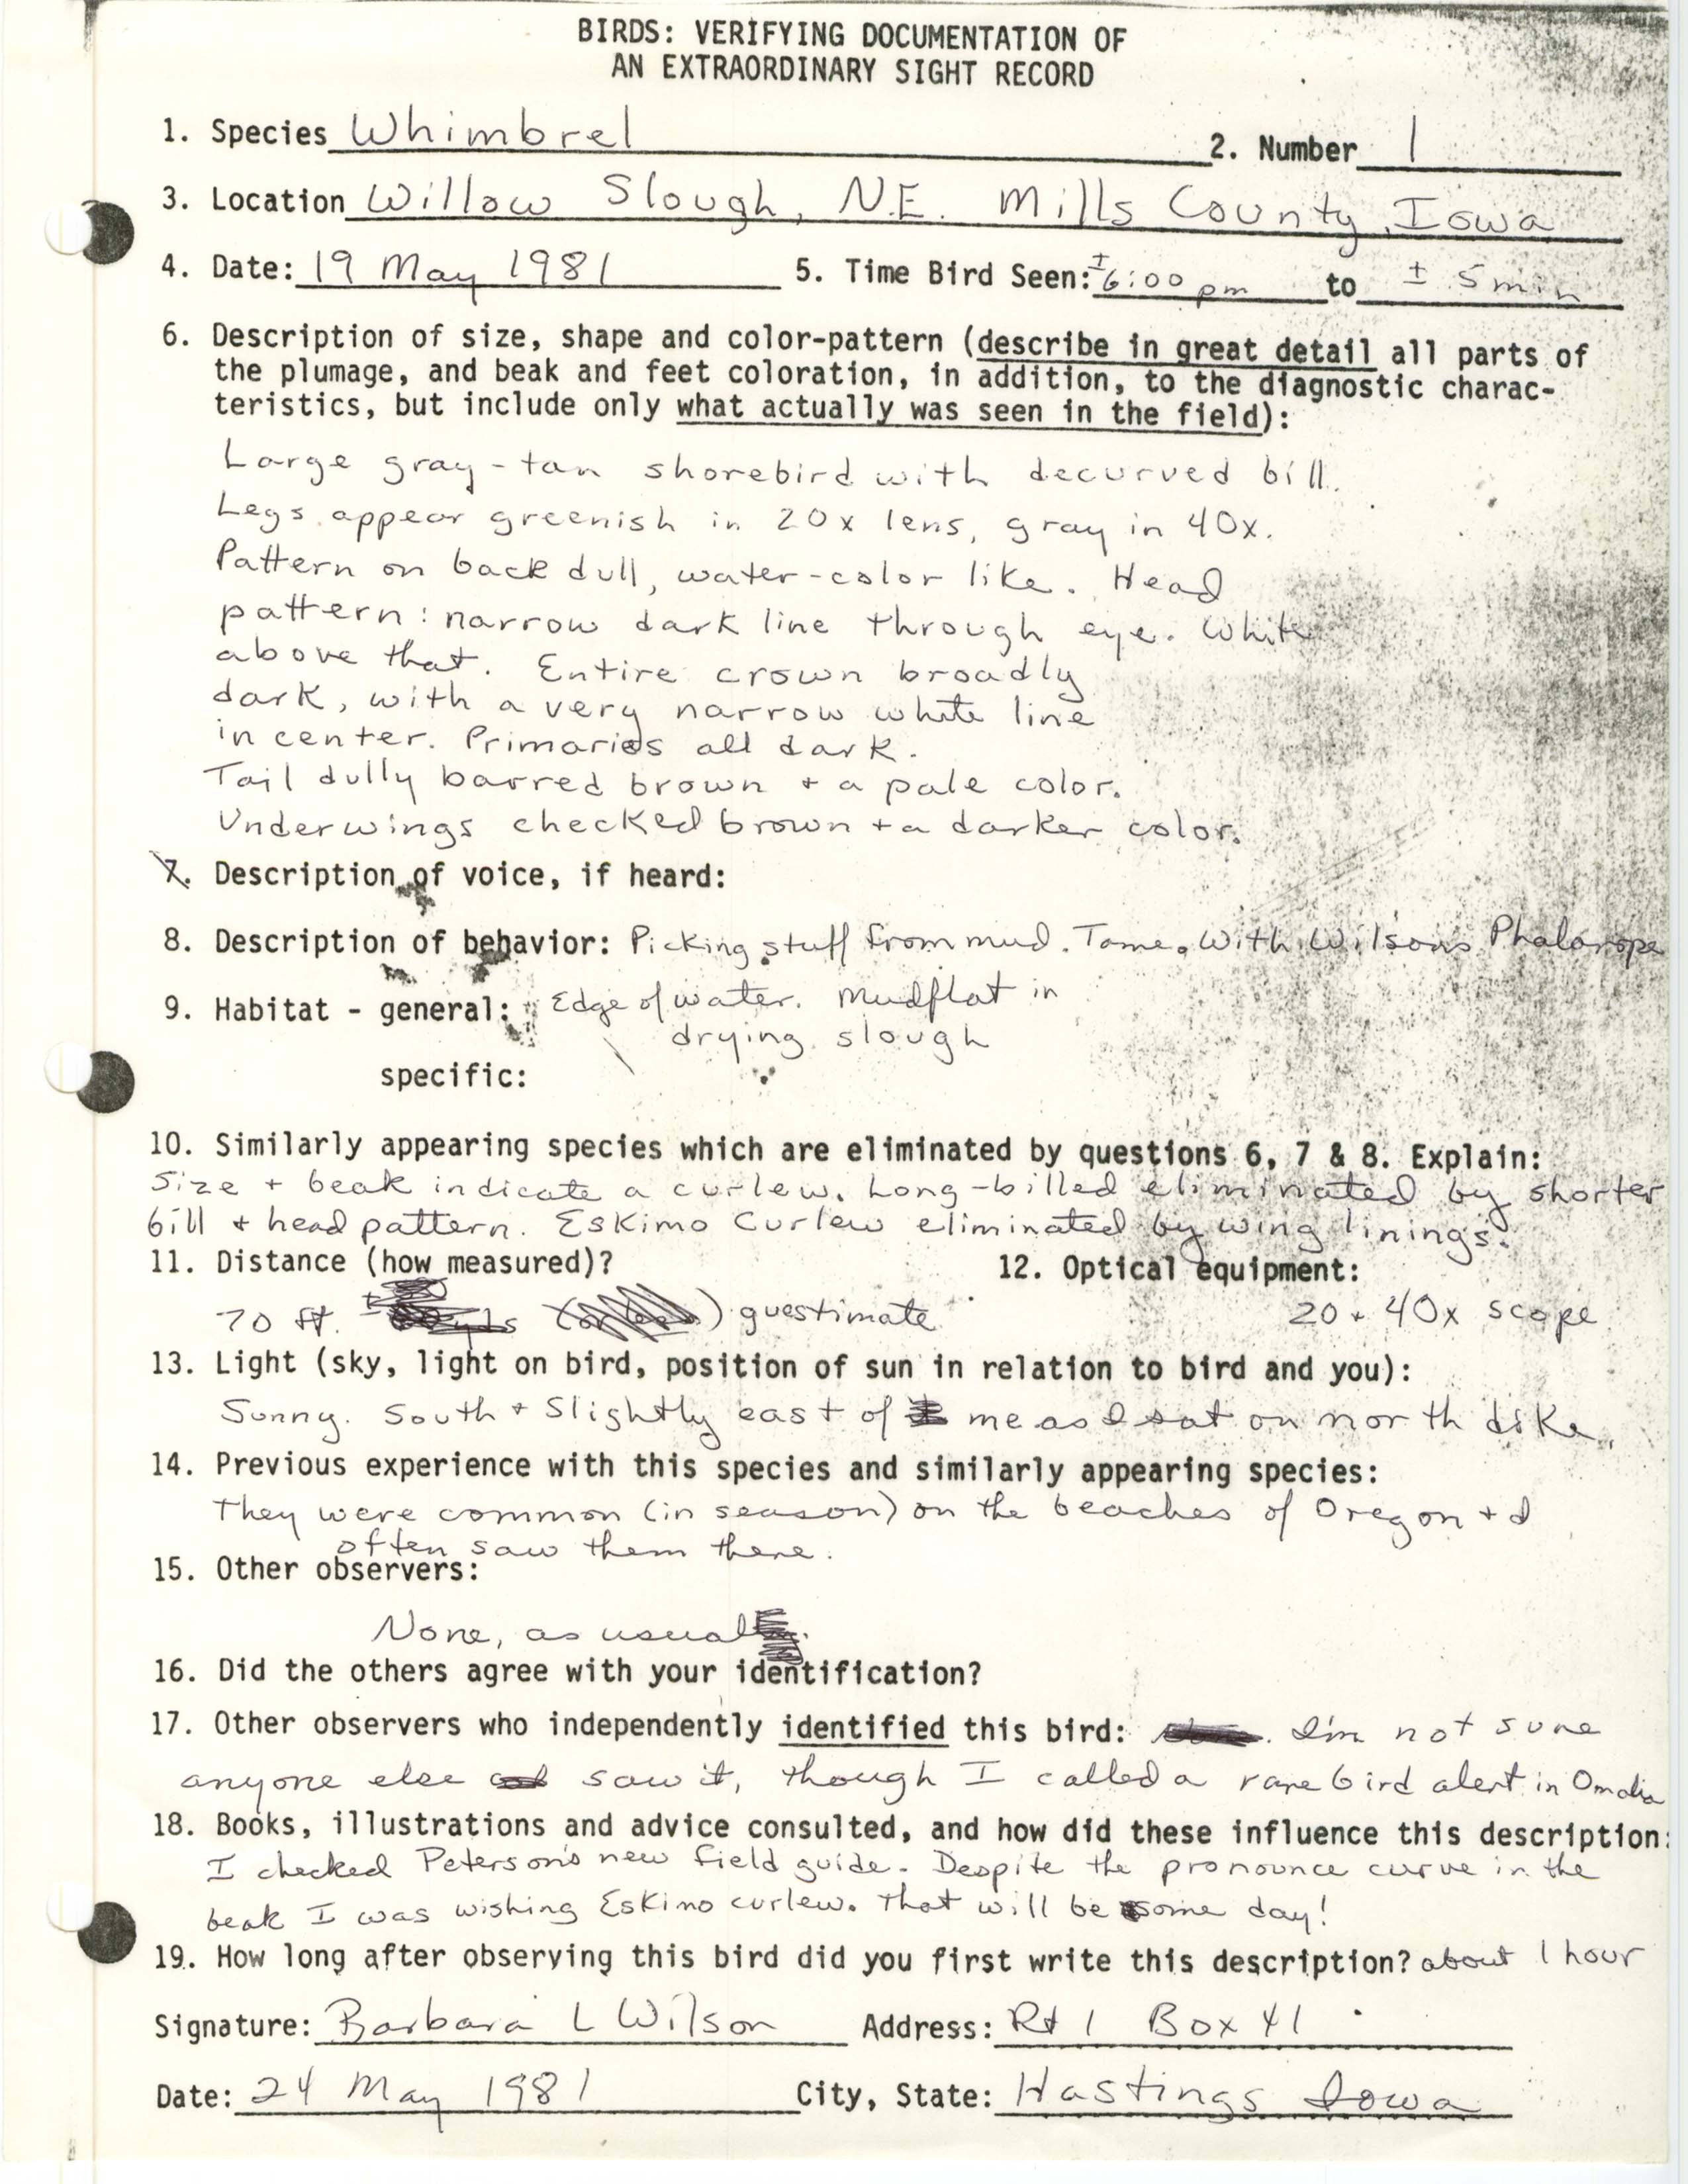 Rare bird documentation form for Whimbrel at Willow Slough, 1981